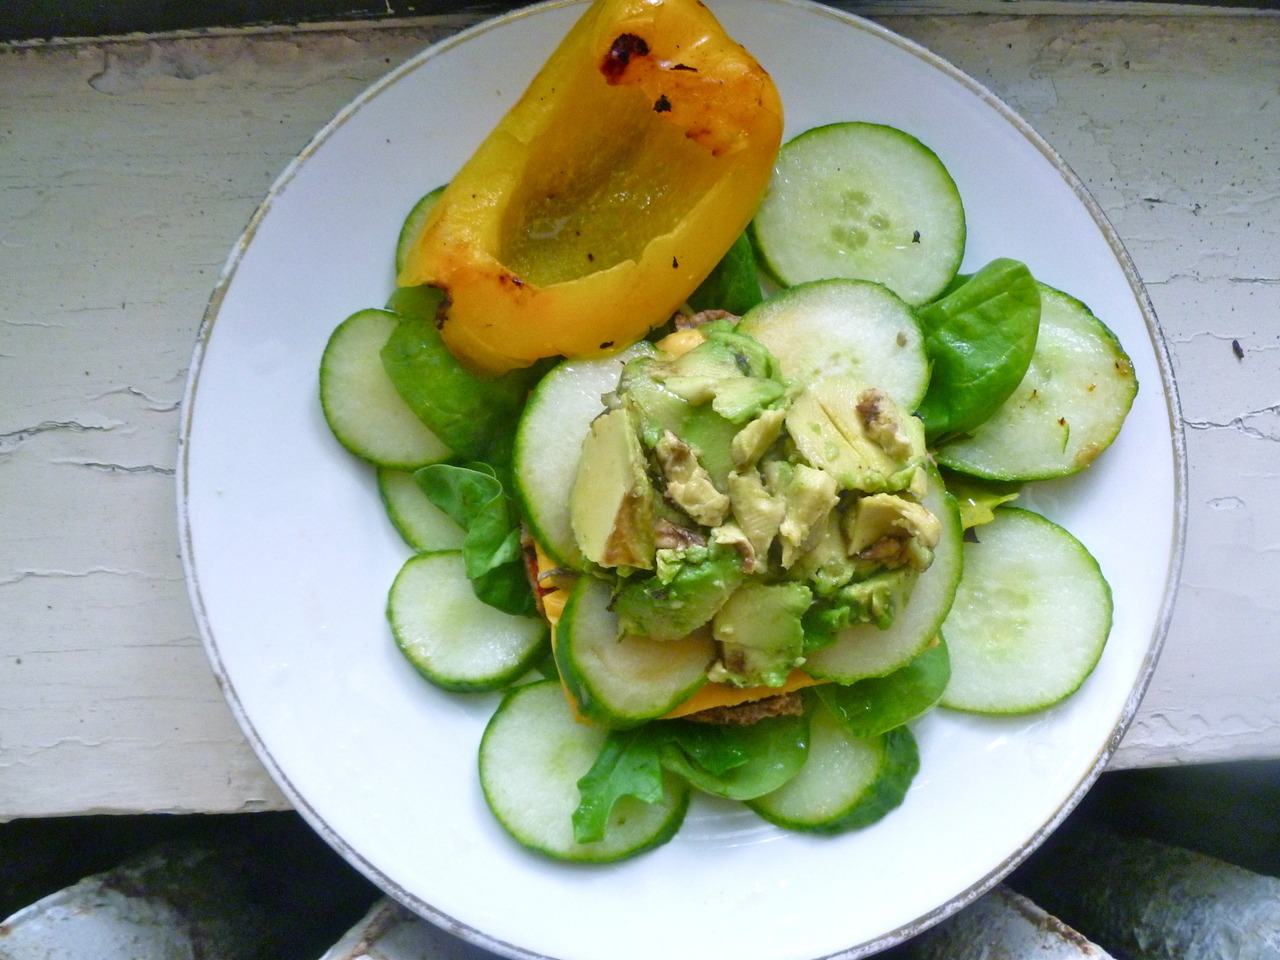 lovely lunches: avocado, cucumber, melted cheddar flavoured rice cheese on a Franklin Farms’ Portabella Veggie Burger with spinach (and more cucumbers) and a sauteed sweet bell pepper